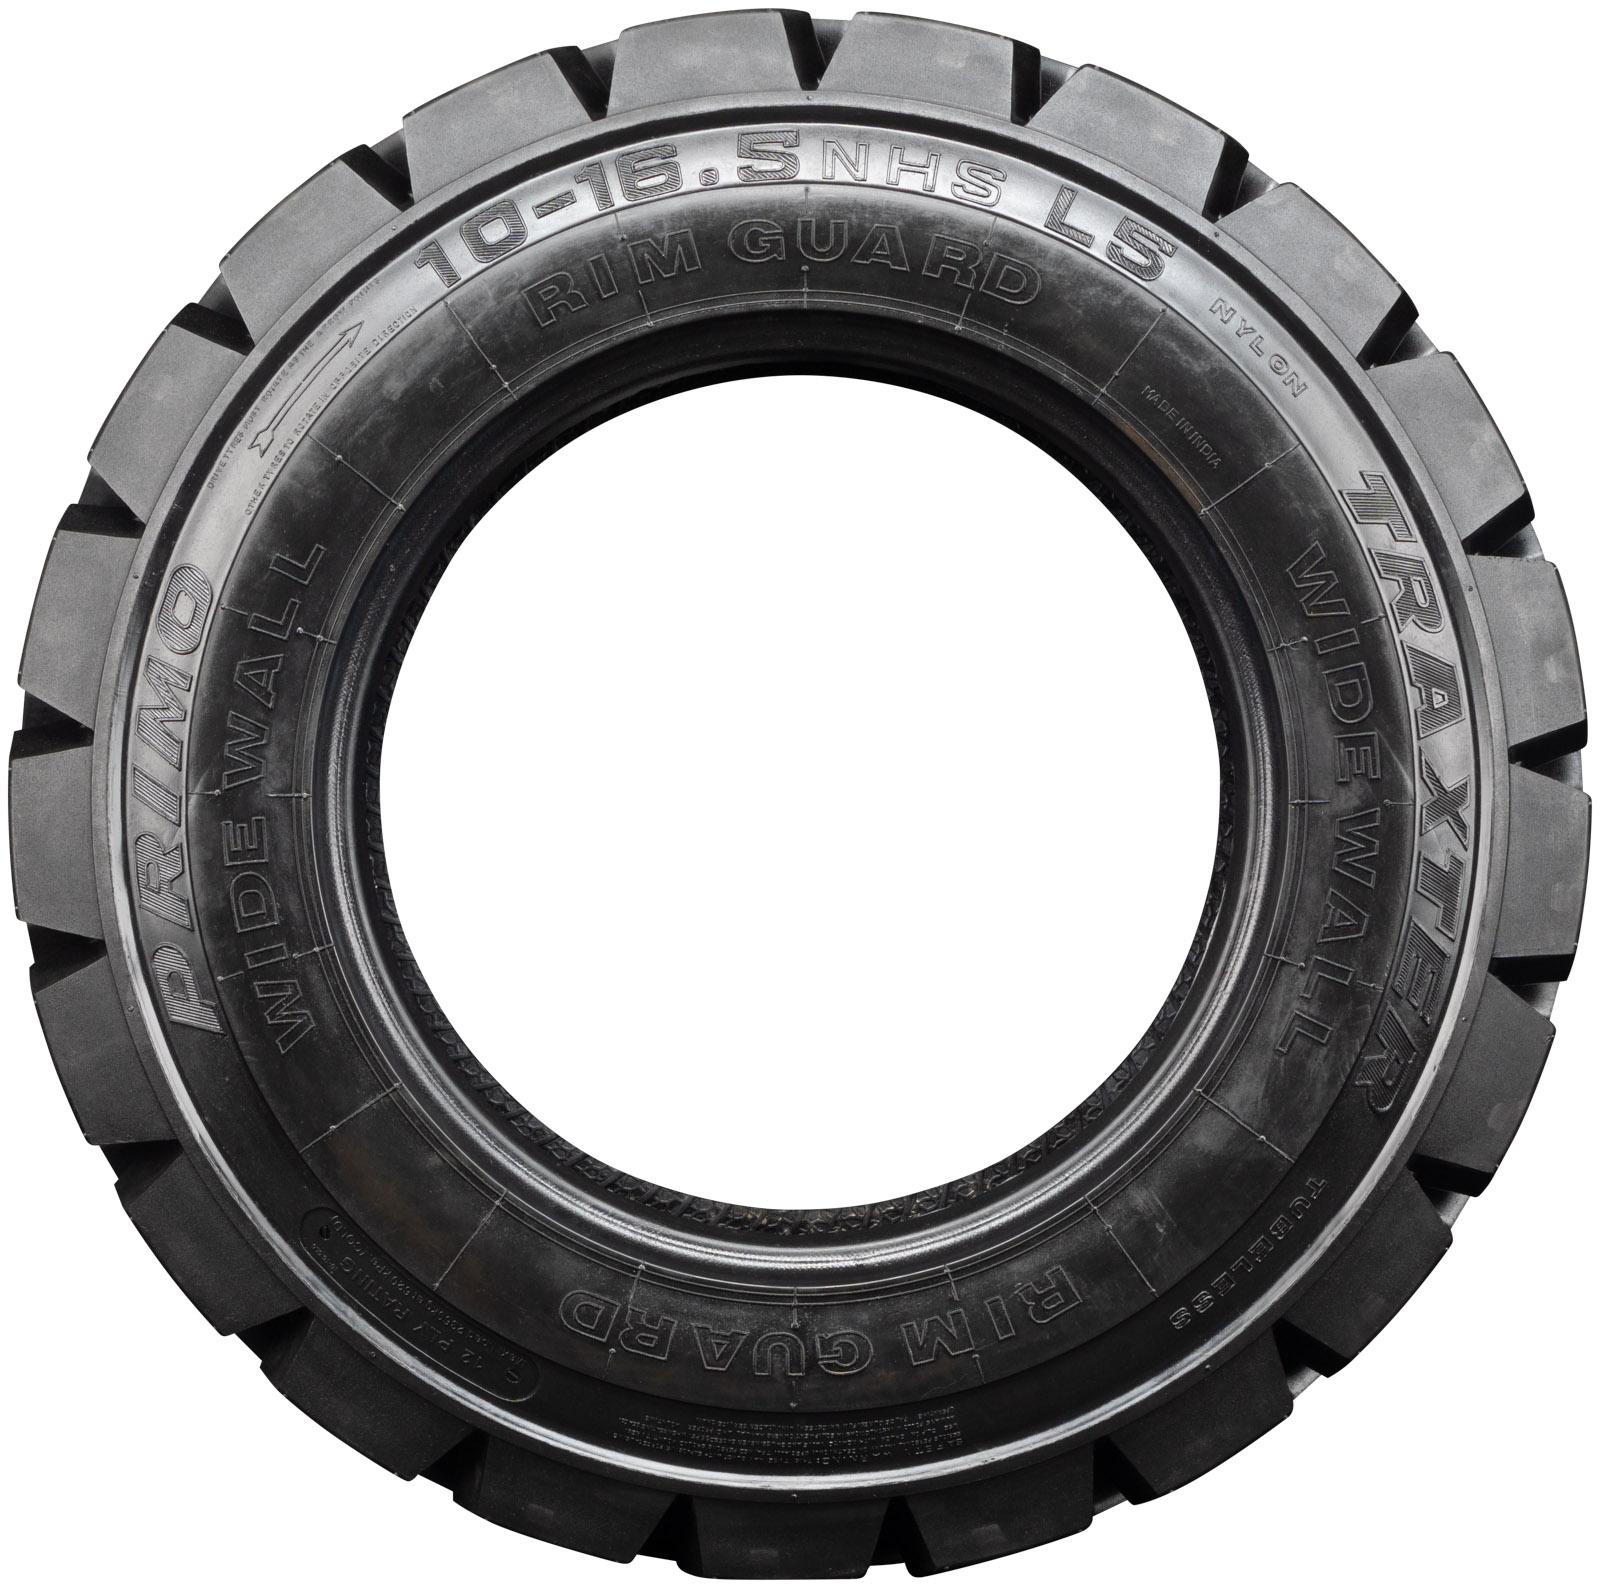 set of 4 10x16.5 12-ply primo l-5 skid steer heavy duty tires